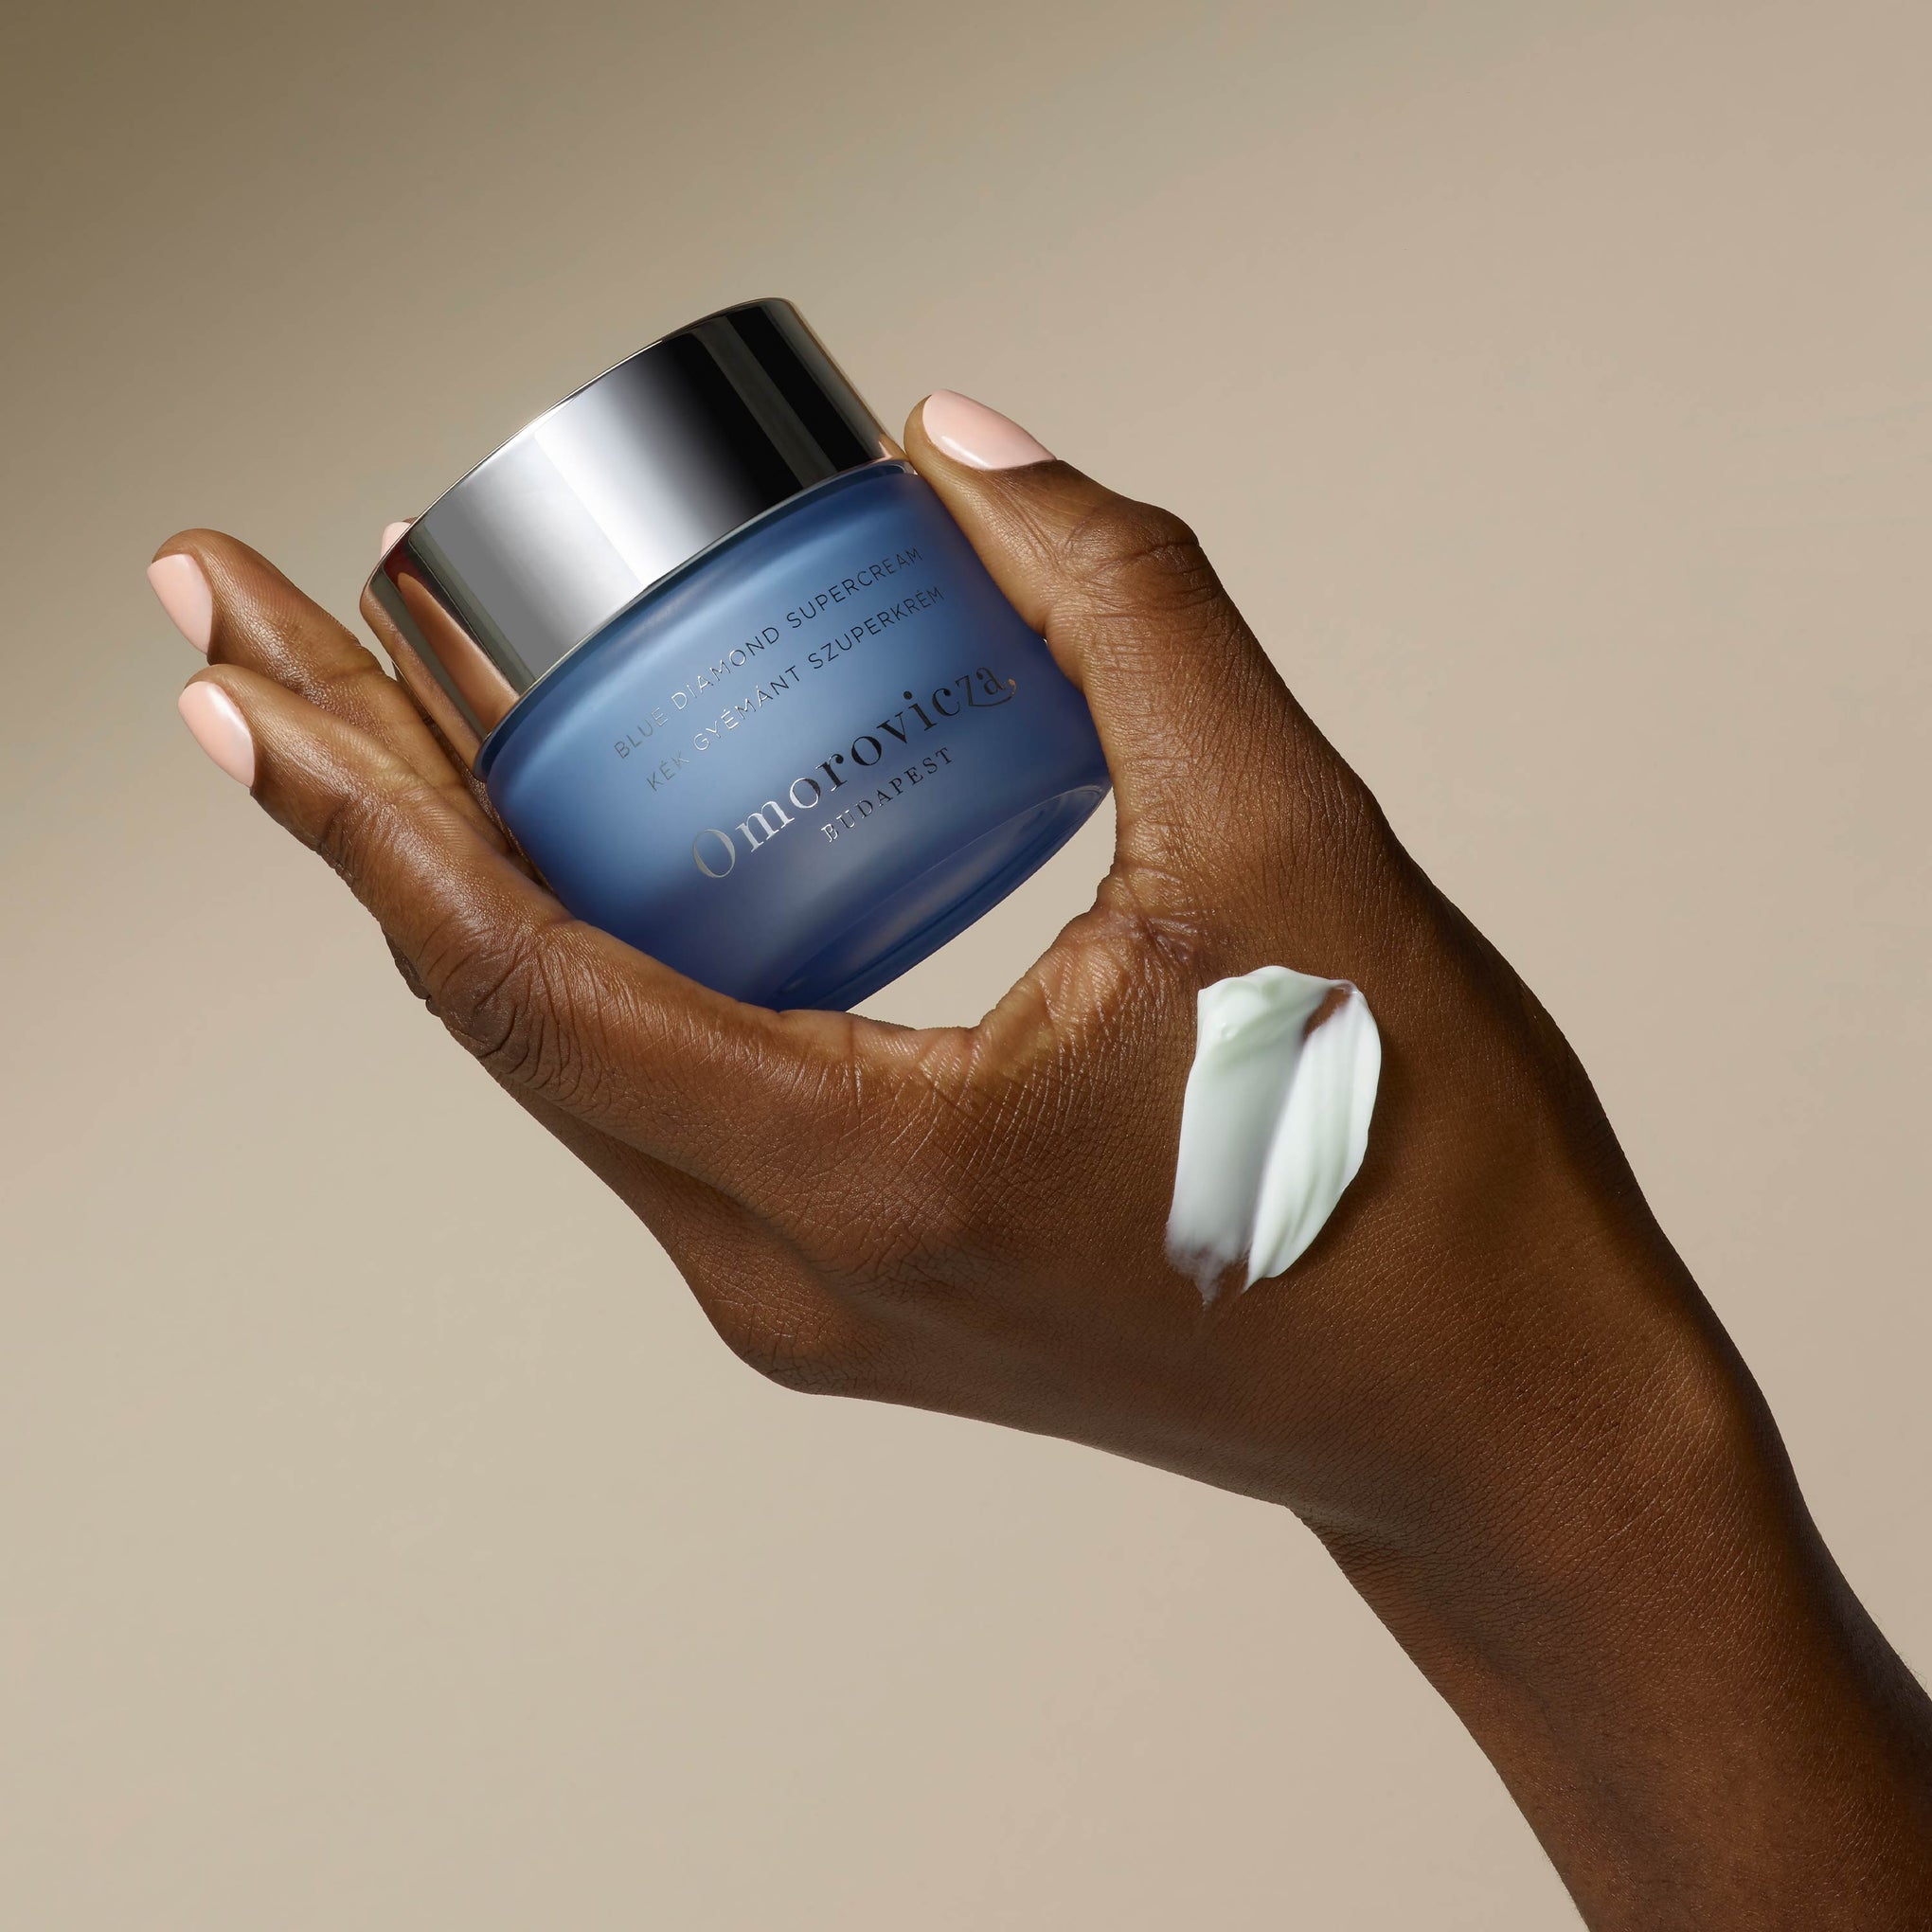 A hand is holding Blue Diamond Supercream. A swatch of the cream is applied to a hand.